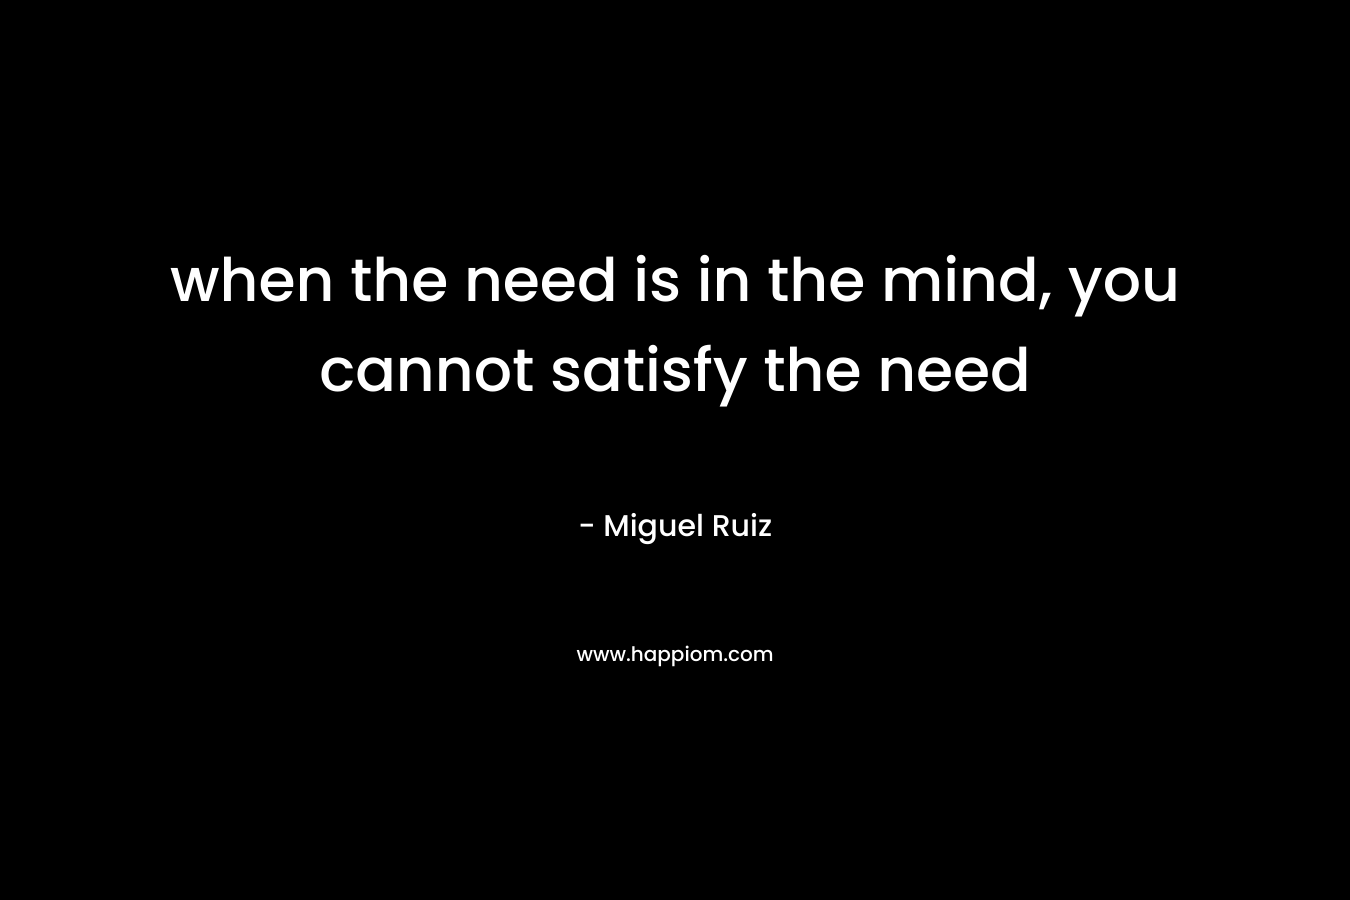 when the need is in the mind, you cannot satisfy the need